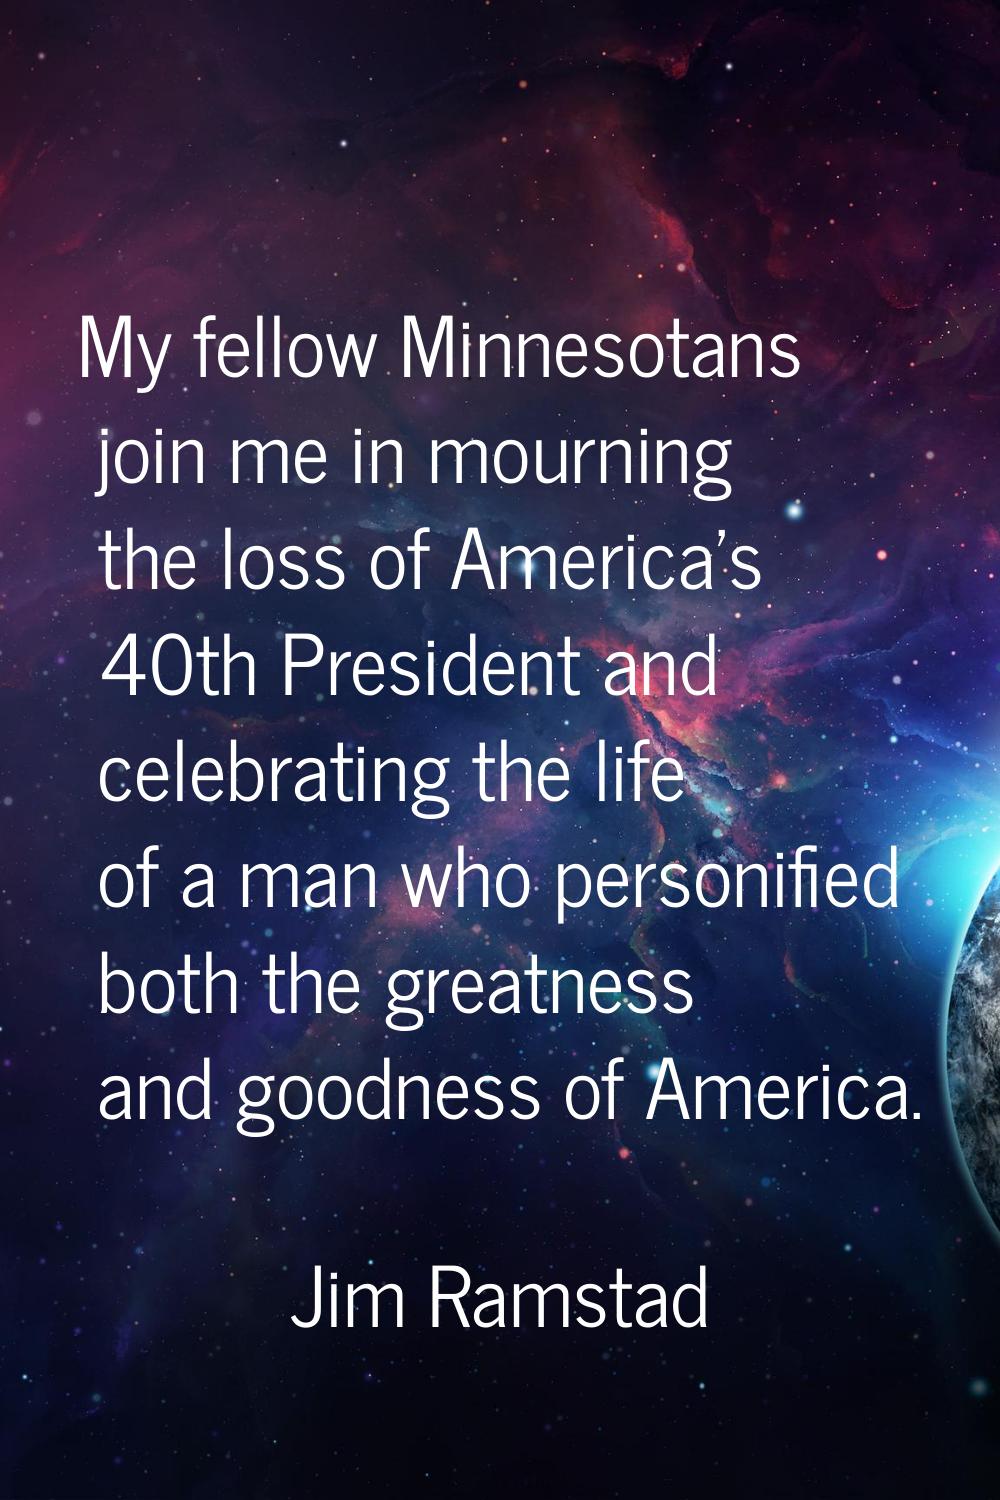 My fellow Minnesotans join me in mourning the loss of America's 40th President and celebrating the 